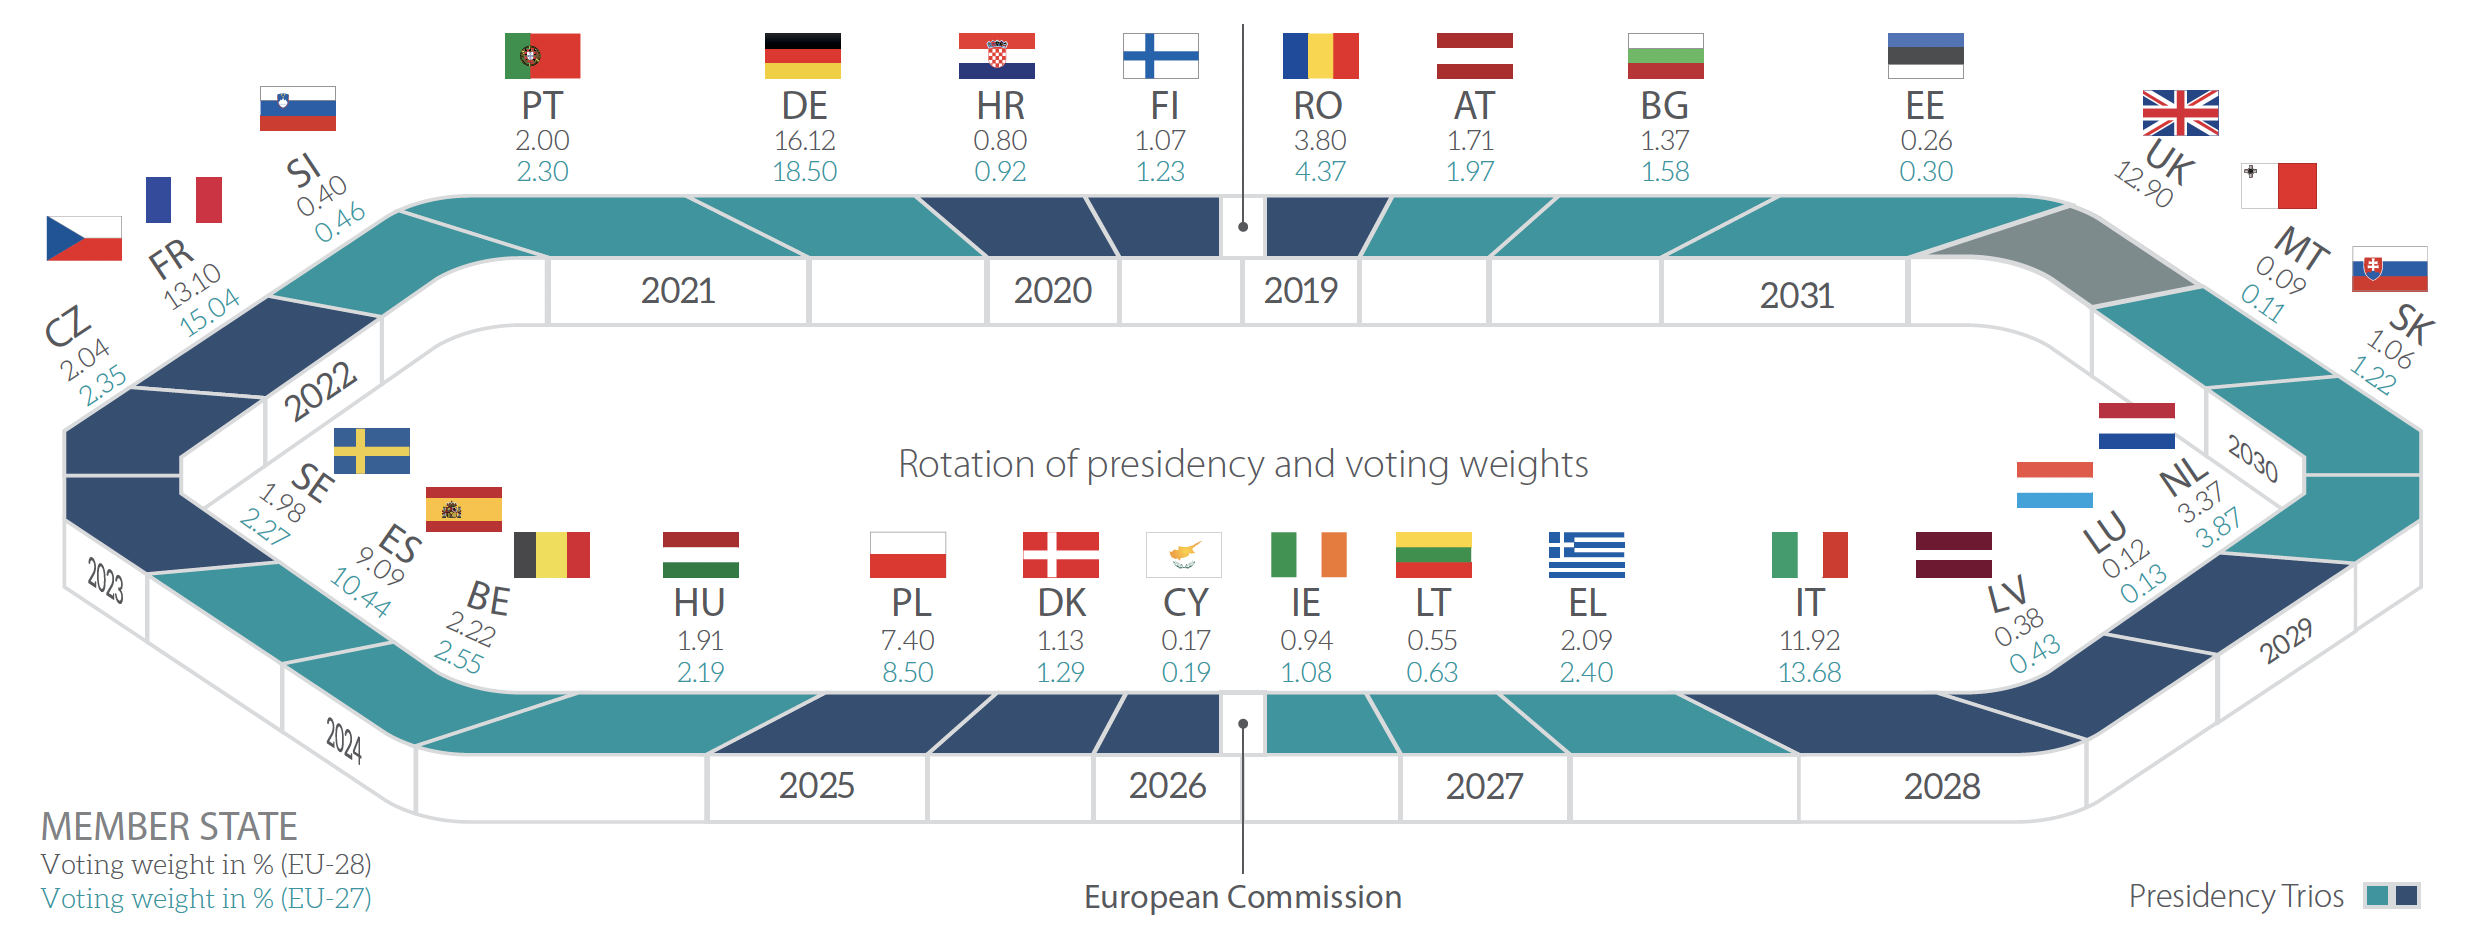 Council of the European Union: Facts and Figures